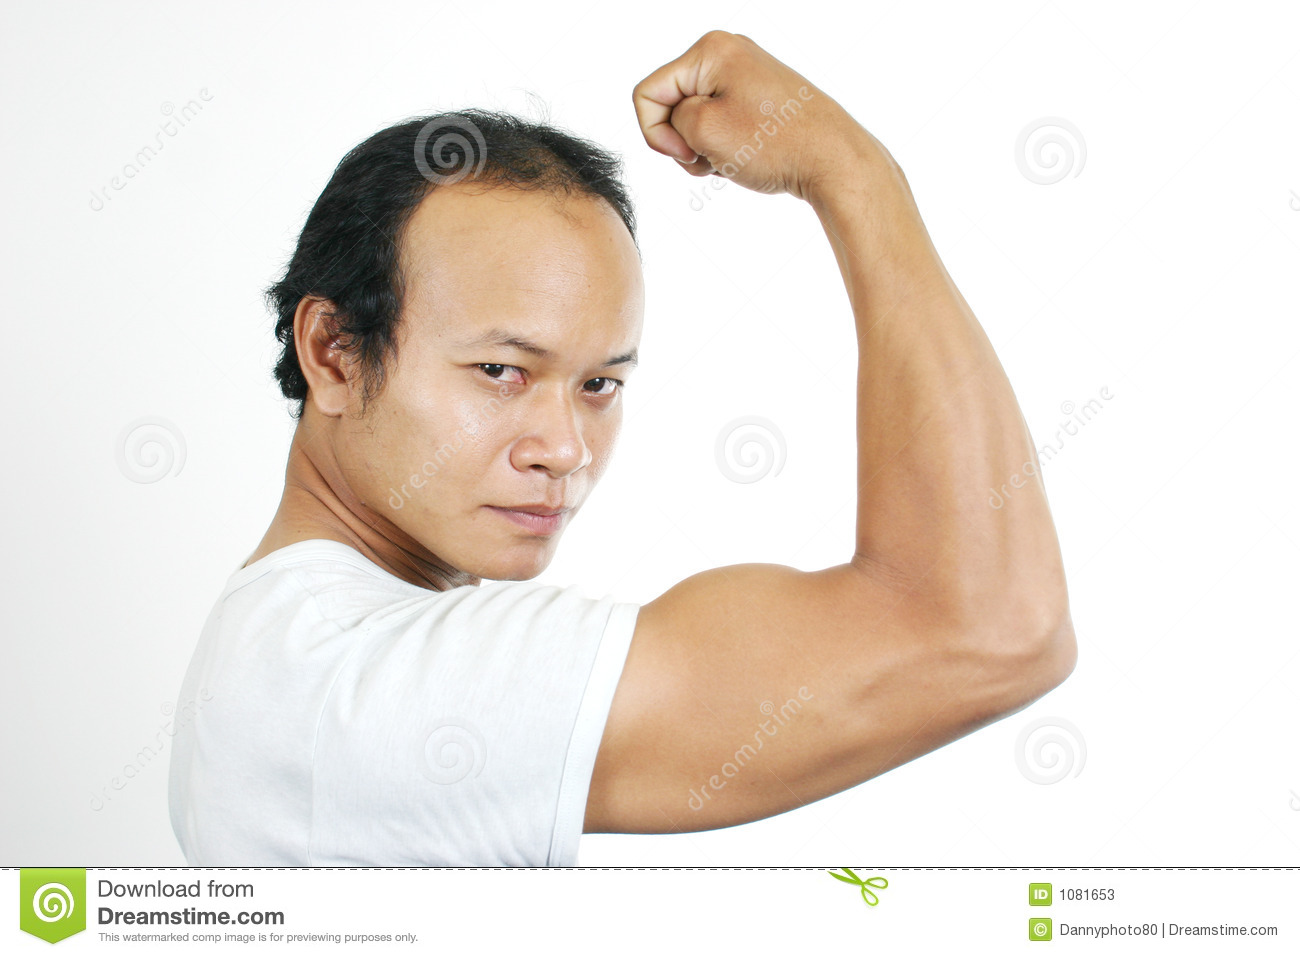 Muscle Guy 6 Stock Photos   Image  1081653